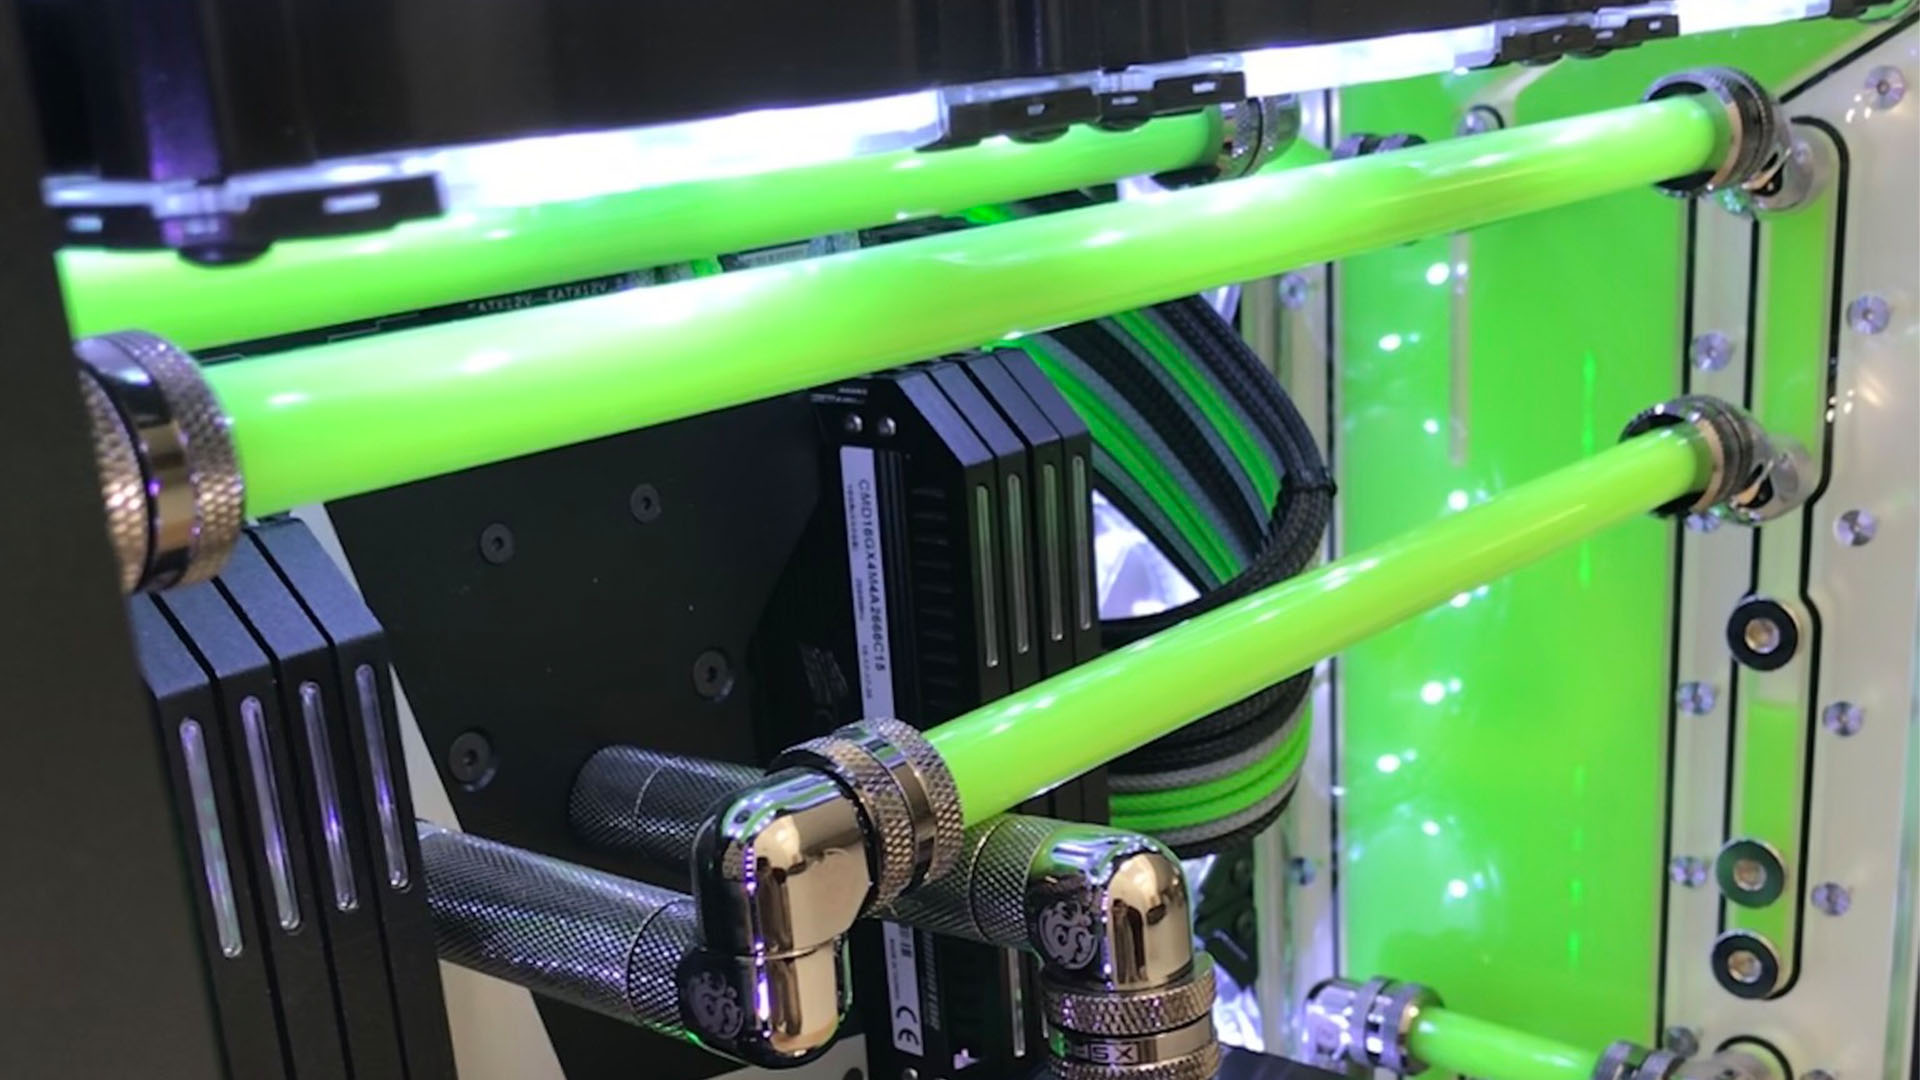 Day-glo green water-cooled PC build